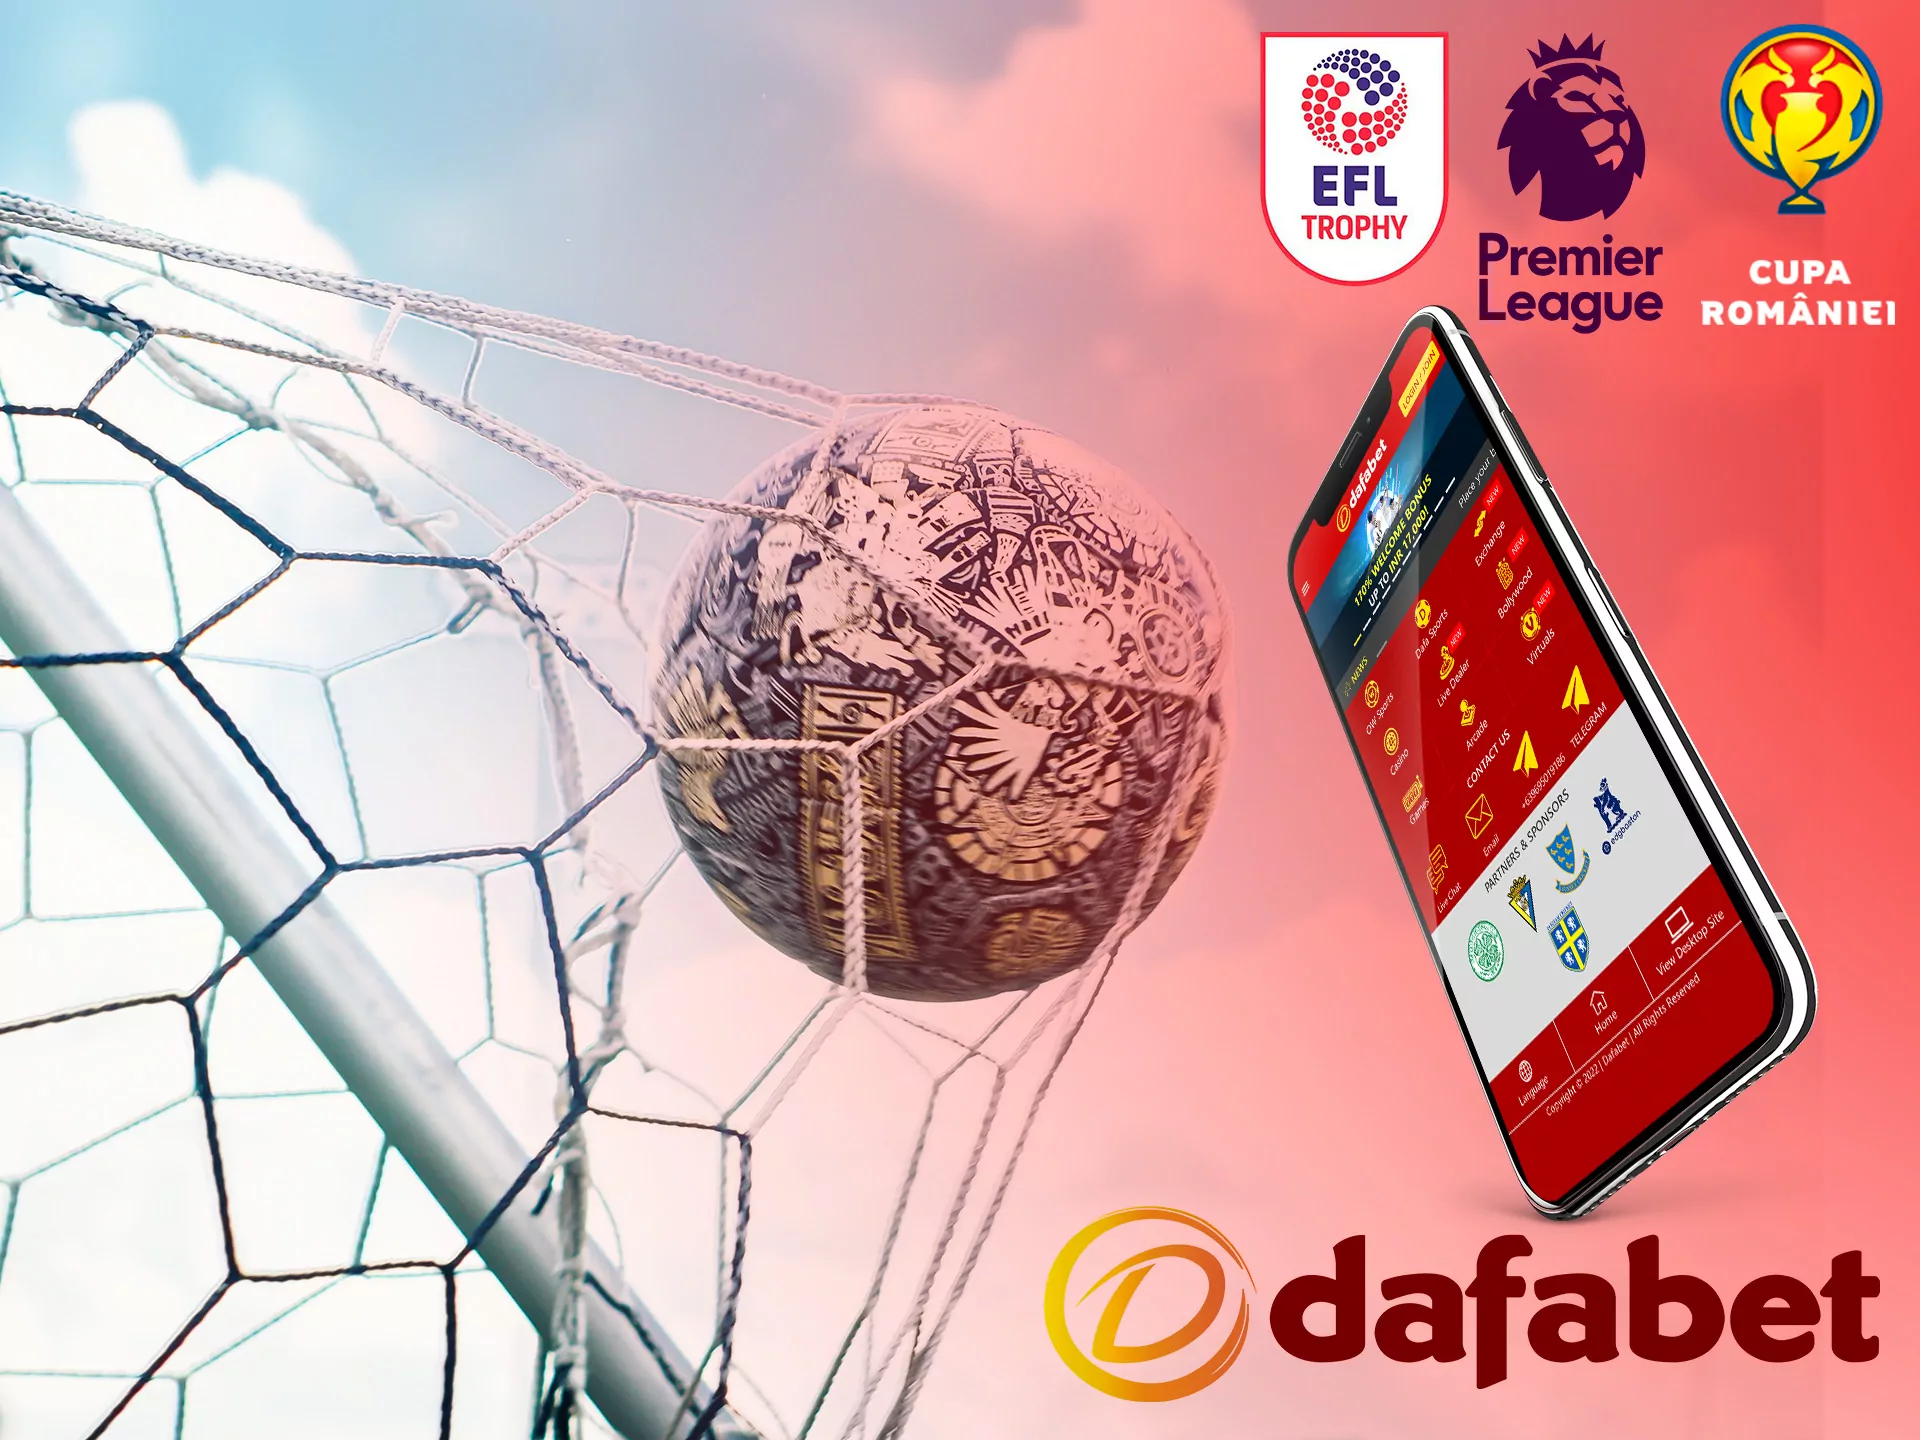 Football fans will find a lot of interesting things in Dafabet, win/draw/win - regular time, Asian Handicap - regular time, over/under and more than 30 other bets.